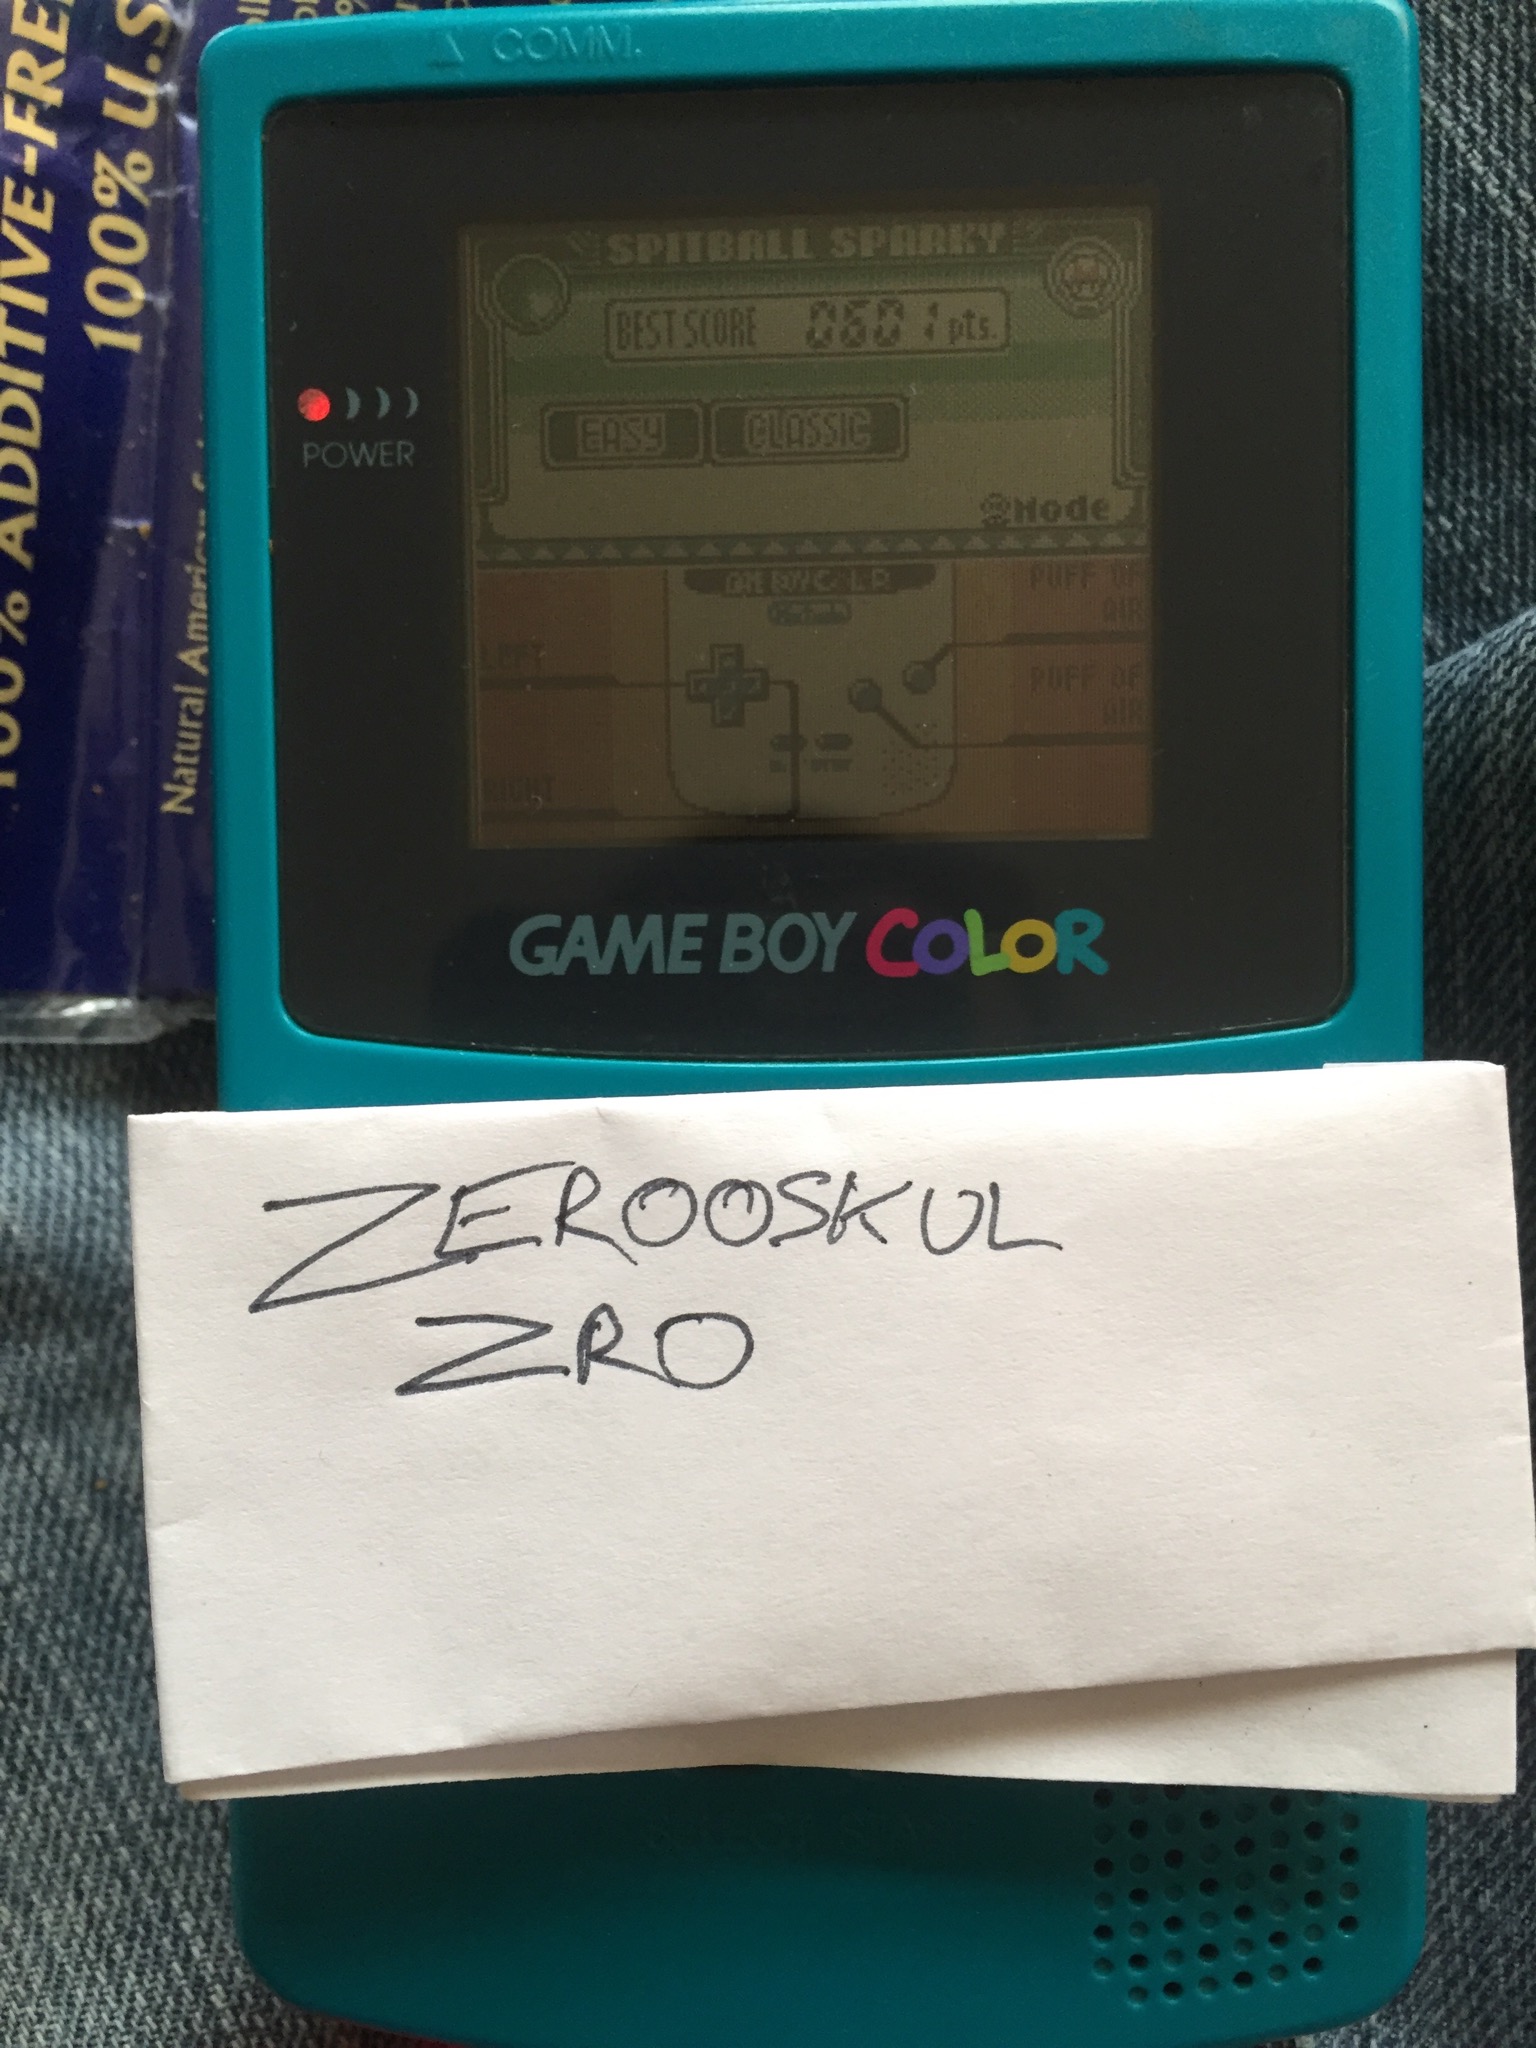 zerooskul: Game & Watch Gallery 3: Spitball Sparky [Classic: Easy] (Game Boy Color) 601 points on 2018-05-21 09:28:21